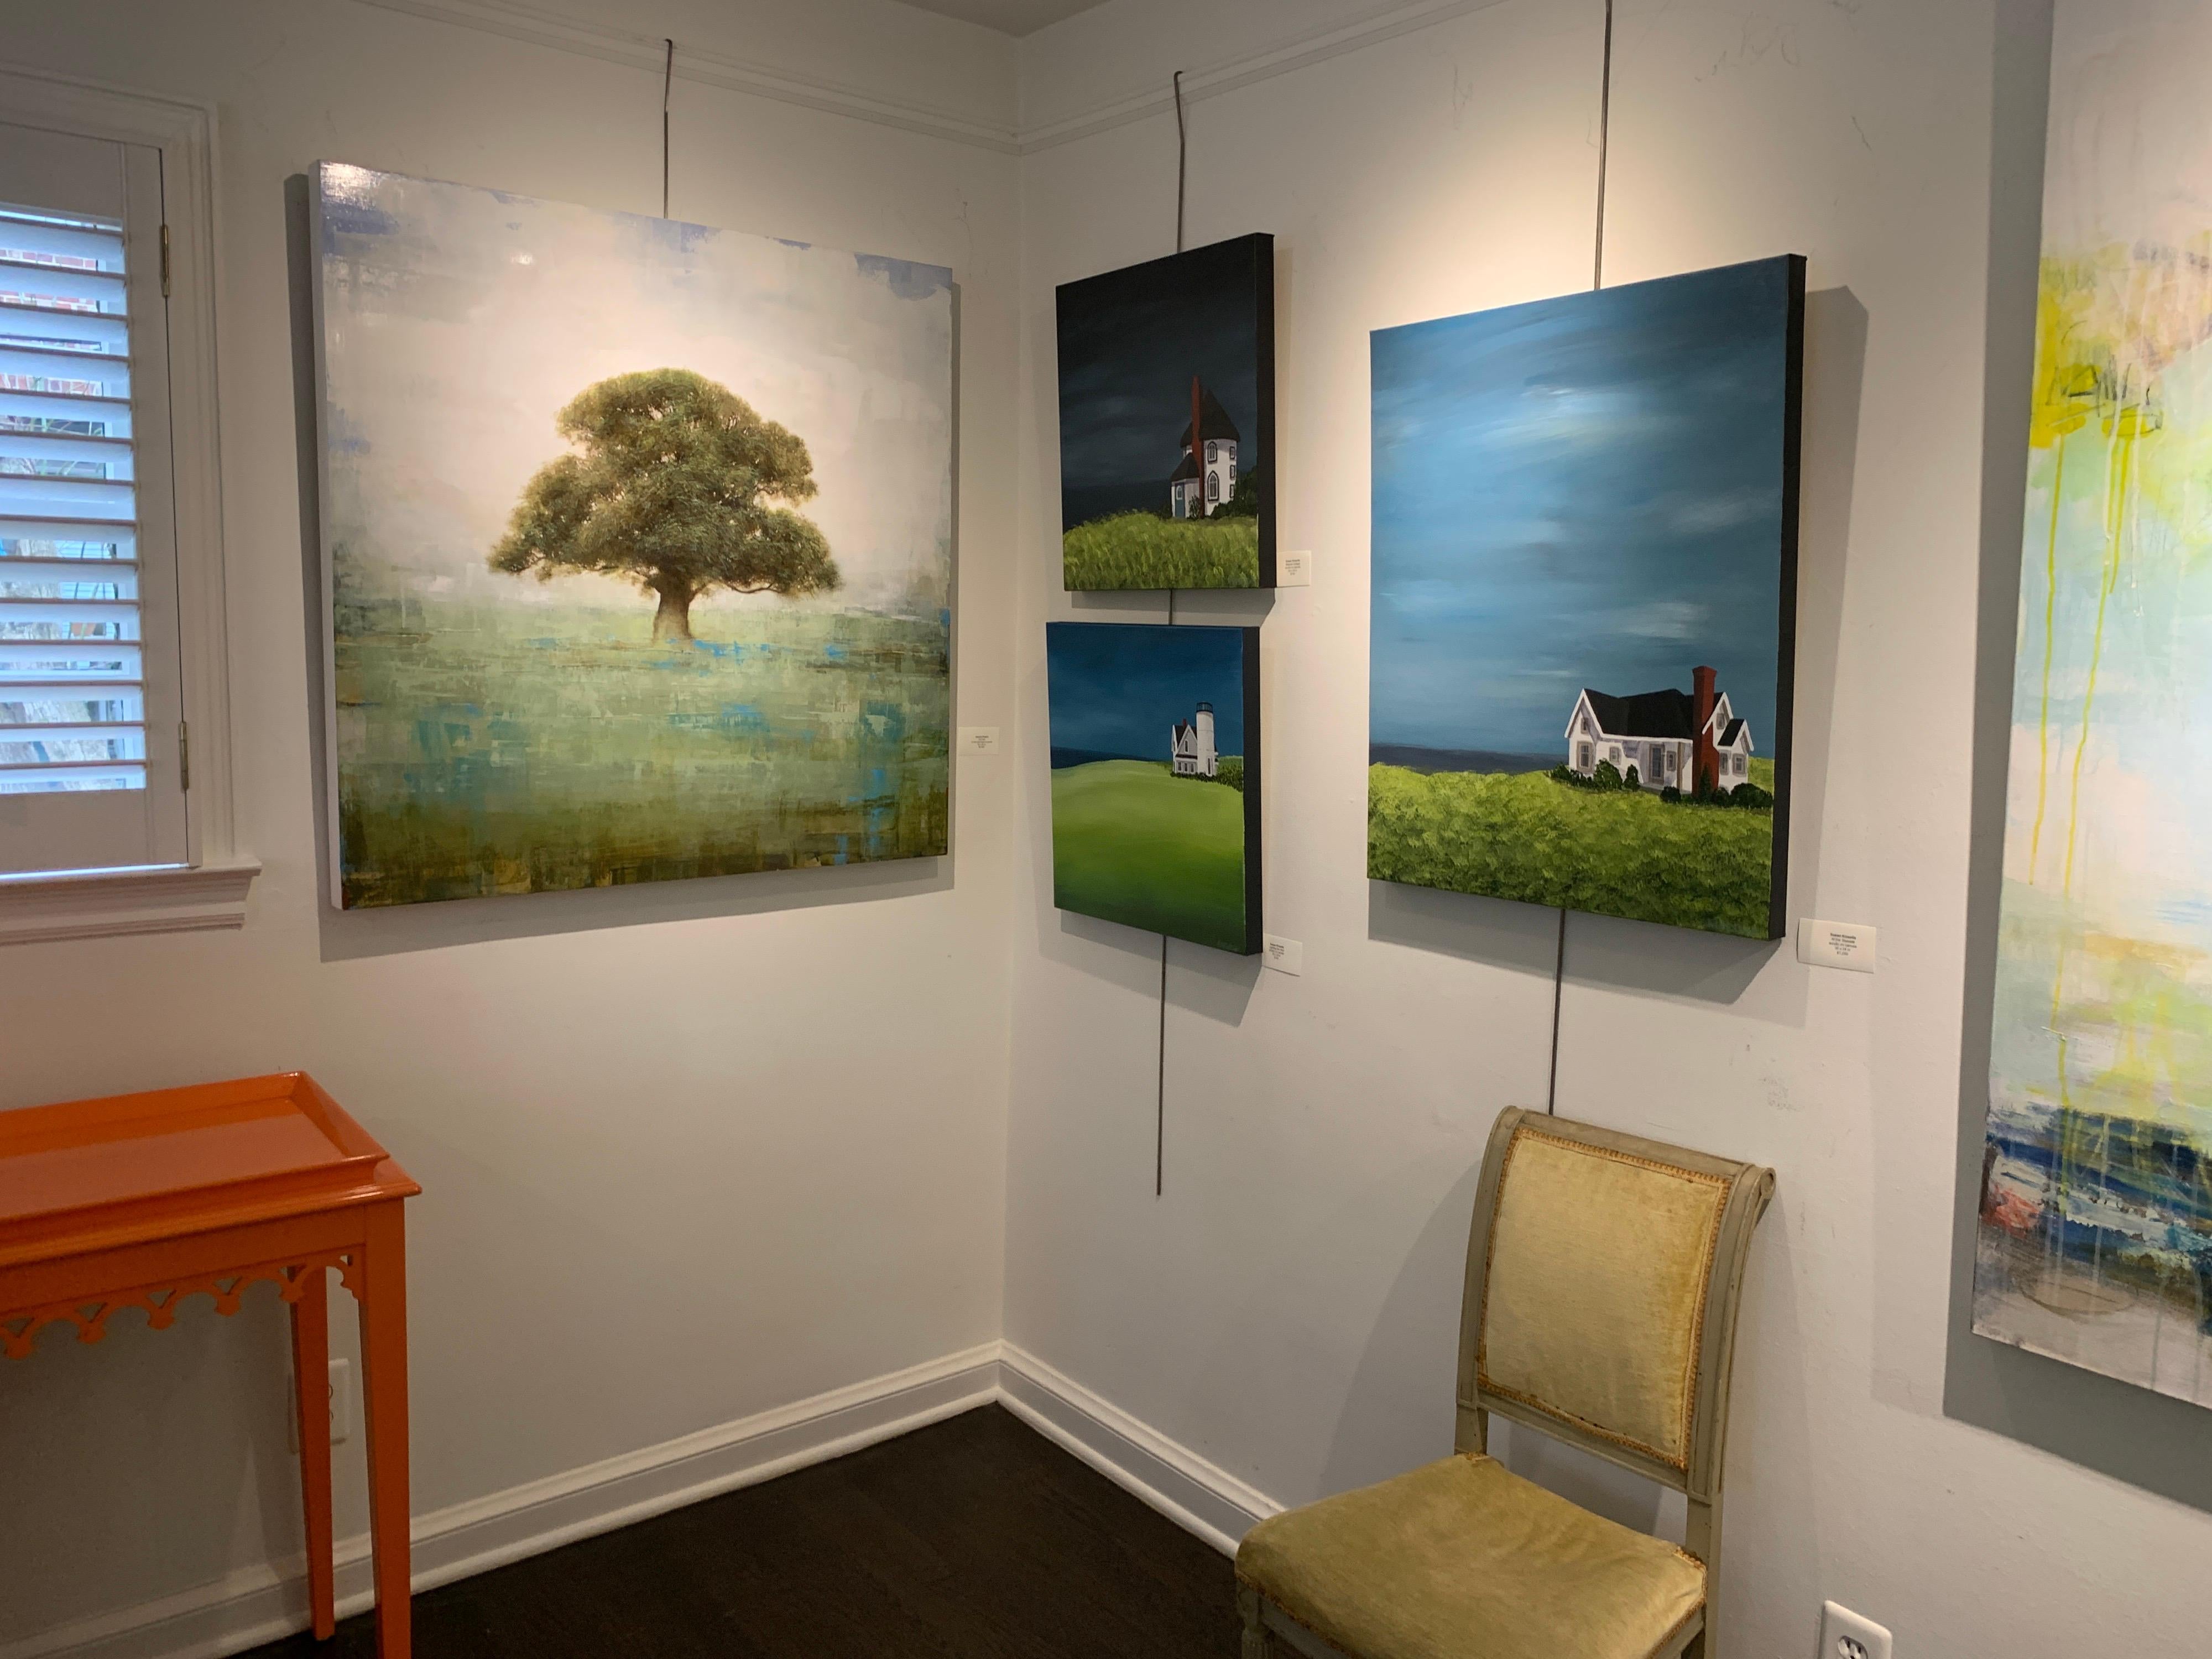 Inspired by nature, Jessica Pisano’s interest in art began at a young age. It was the beautiful landscape of her hometown of Martha's Vineyard that served as her muse. She later pursued her passion for the arts at Lewis and Clark College in